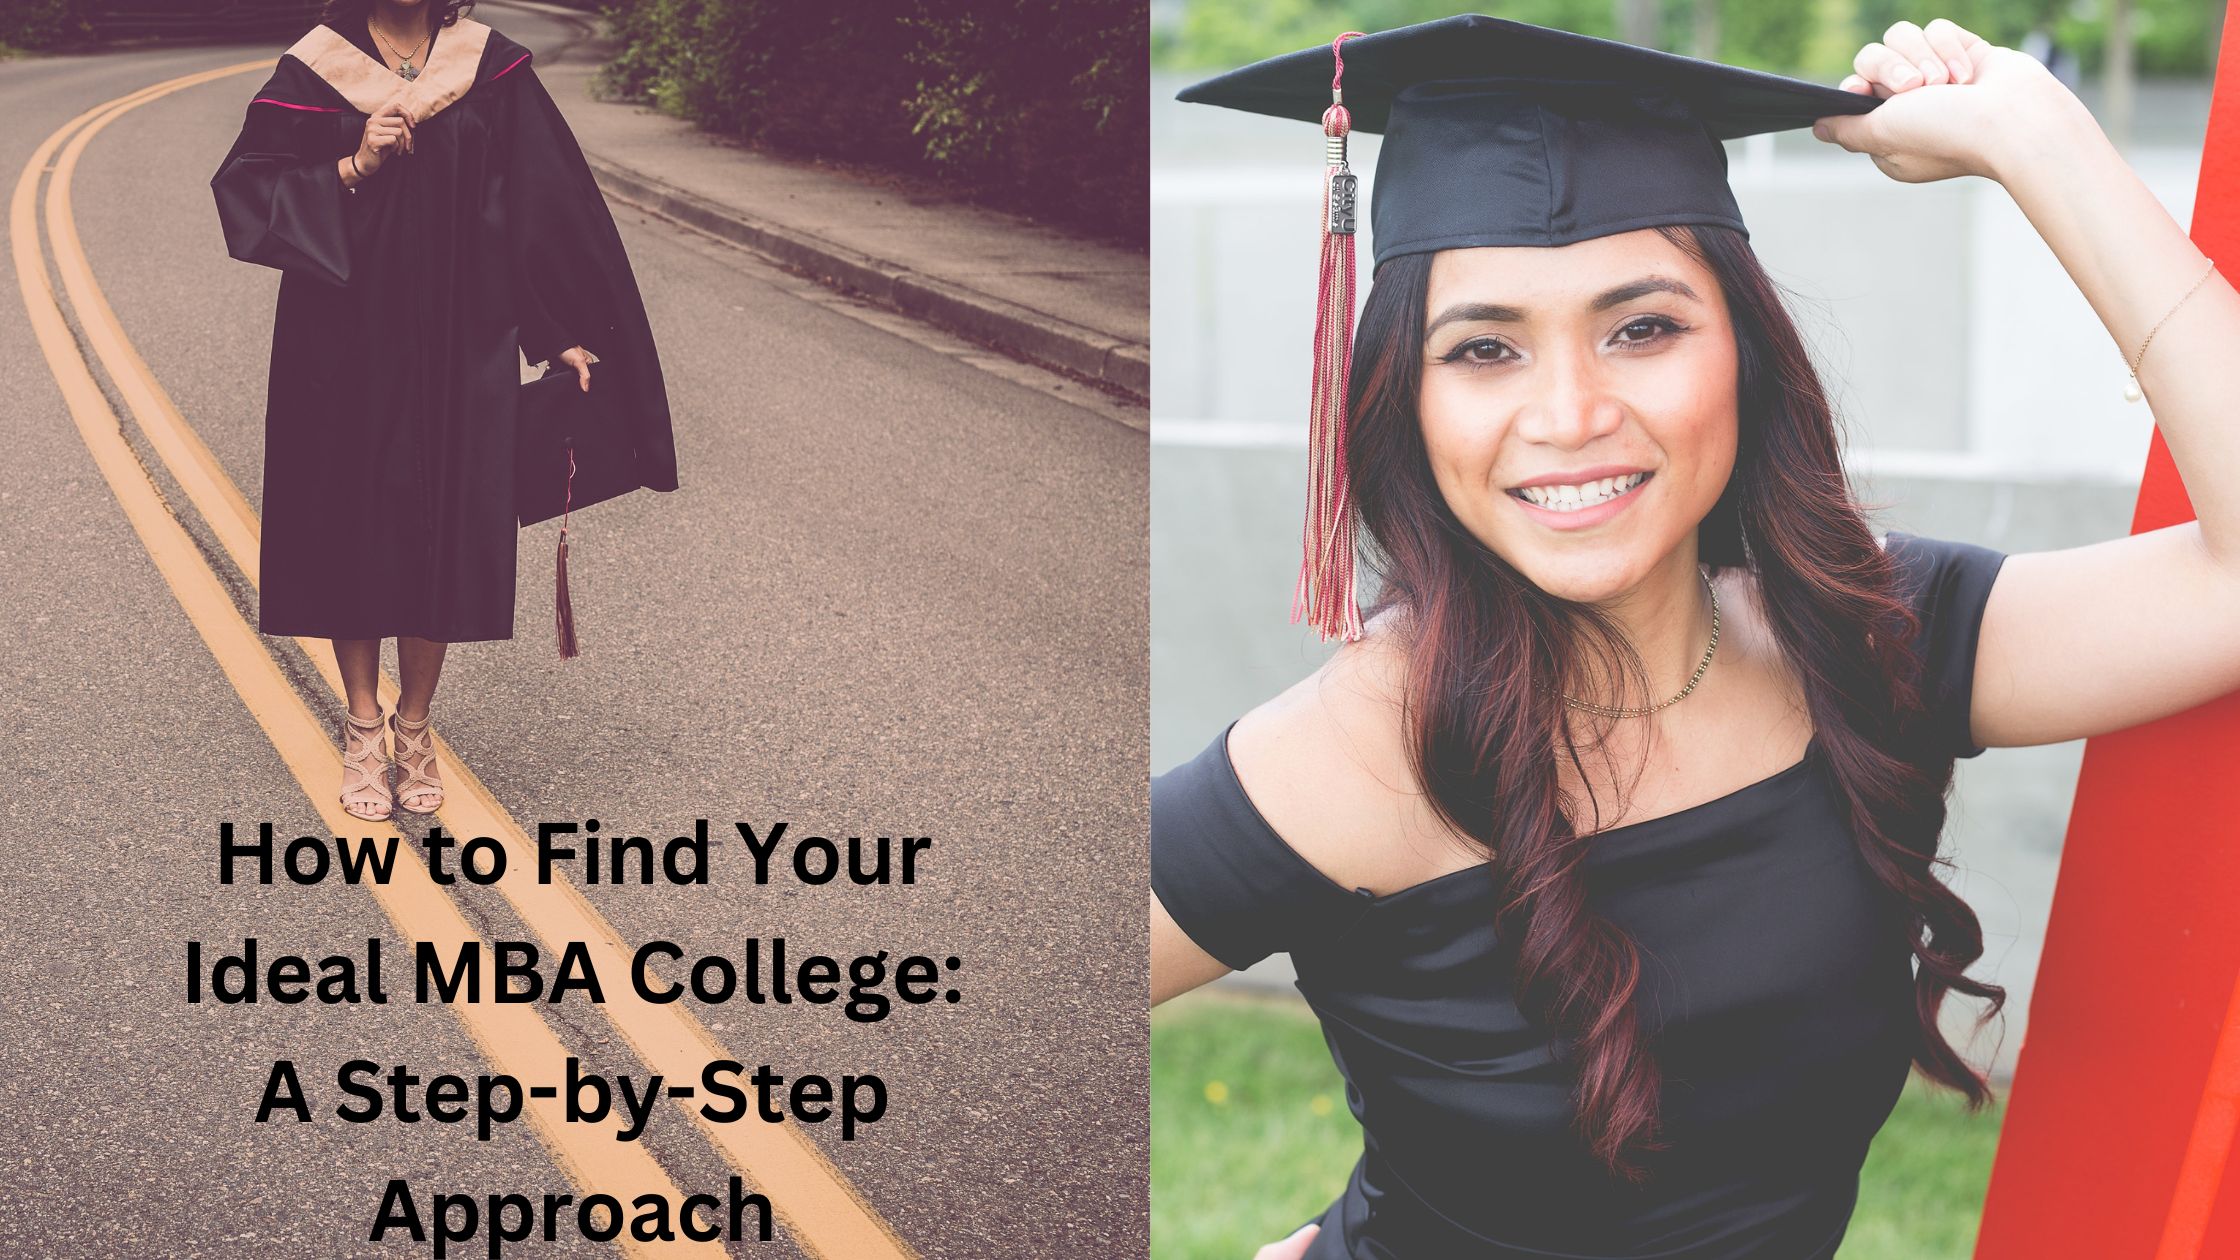 How to Find Your Ideal MBA College: A Step-by-Step Approach